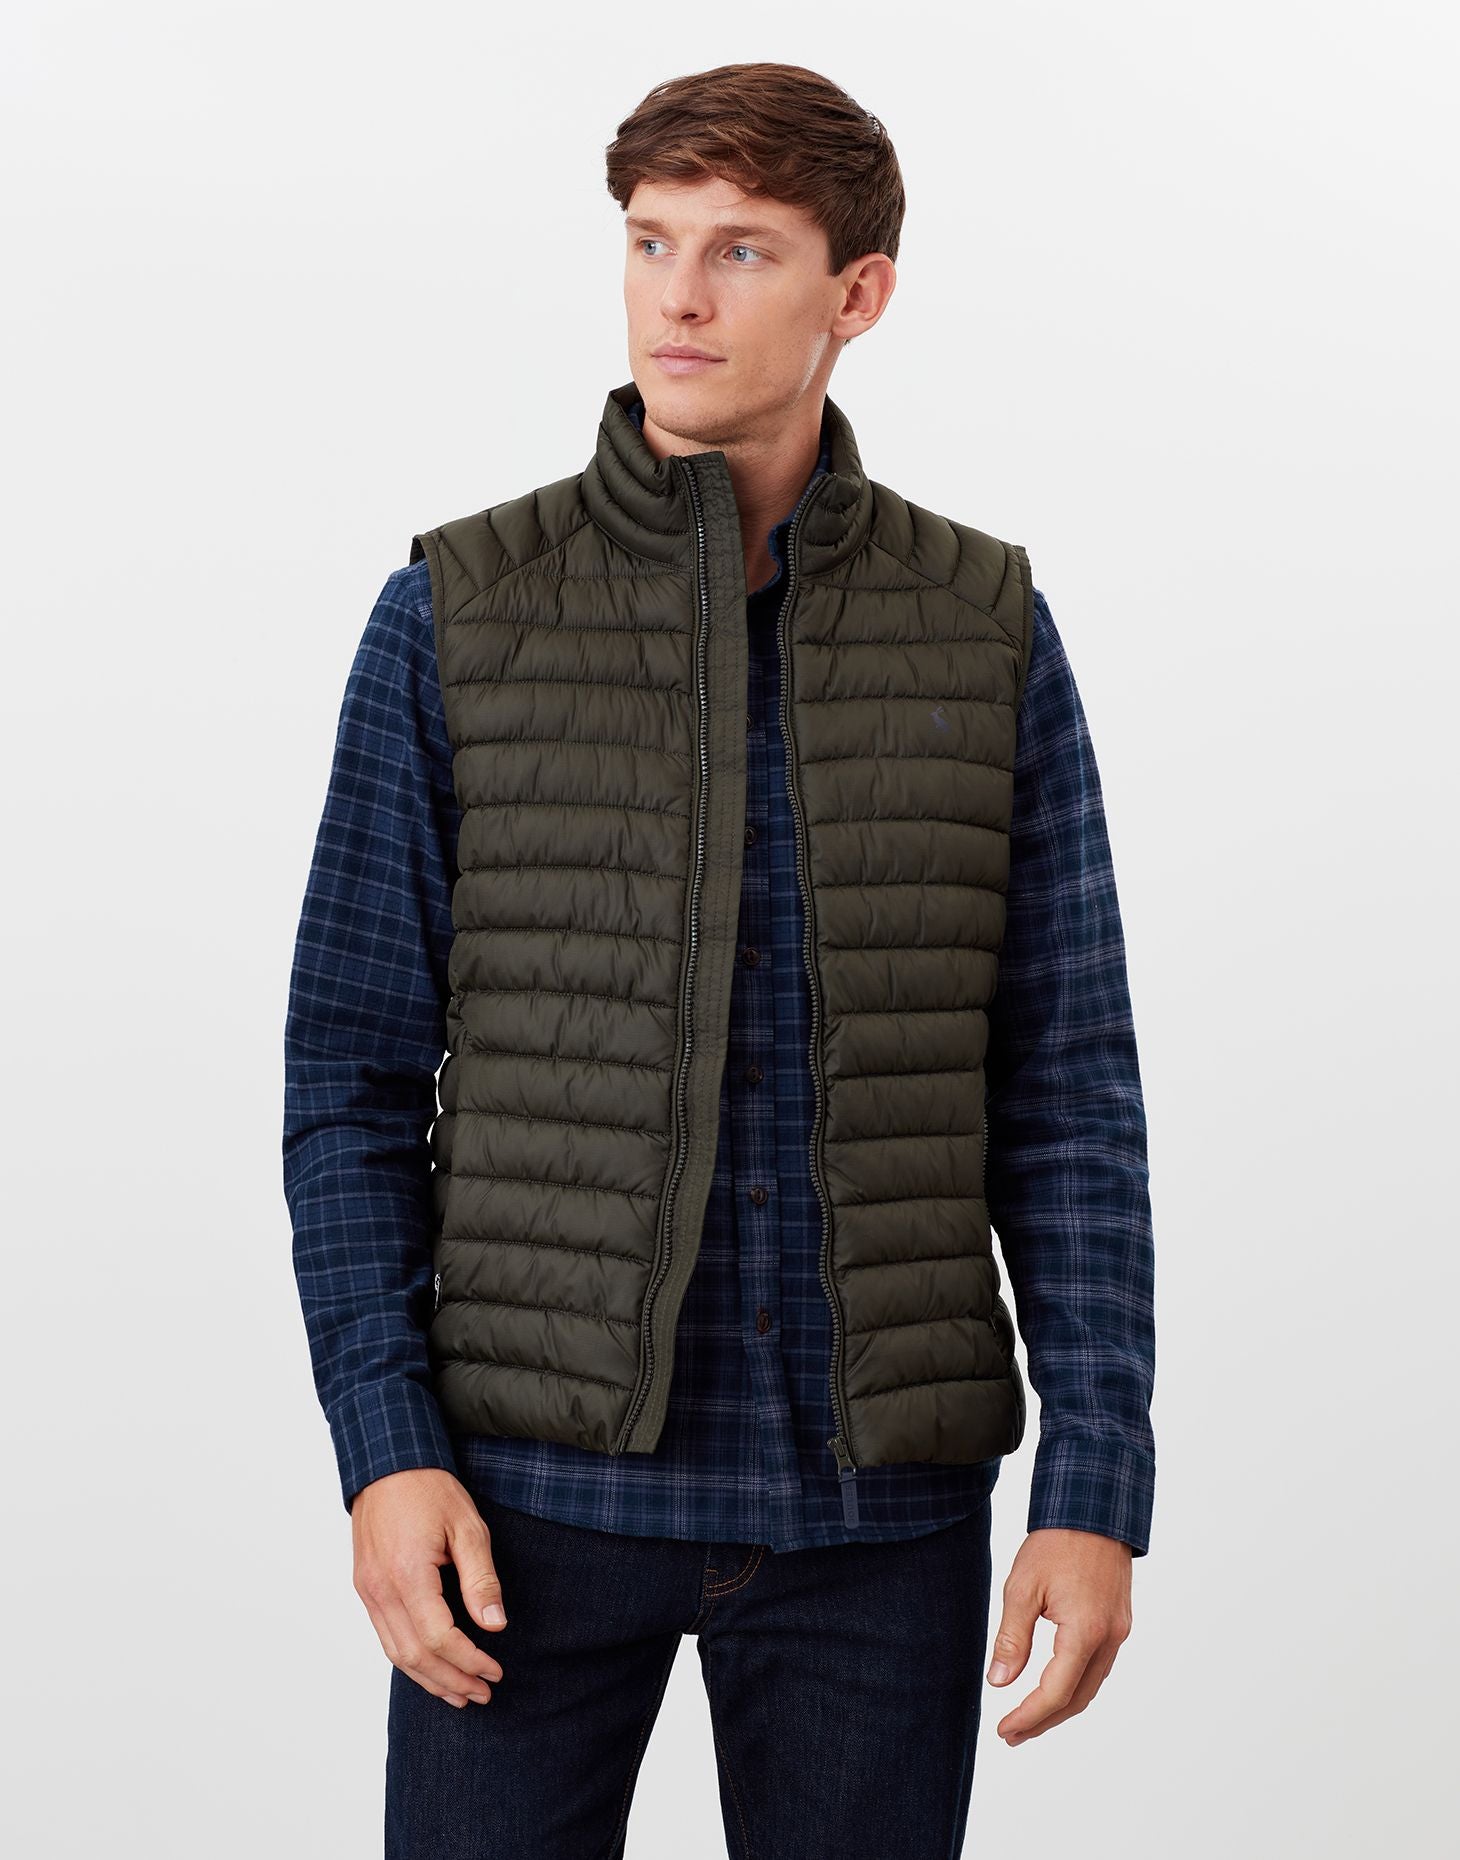 Joules - Men's Go To Gilet - Olive